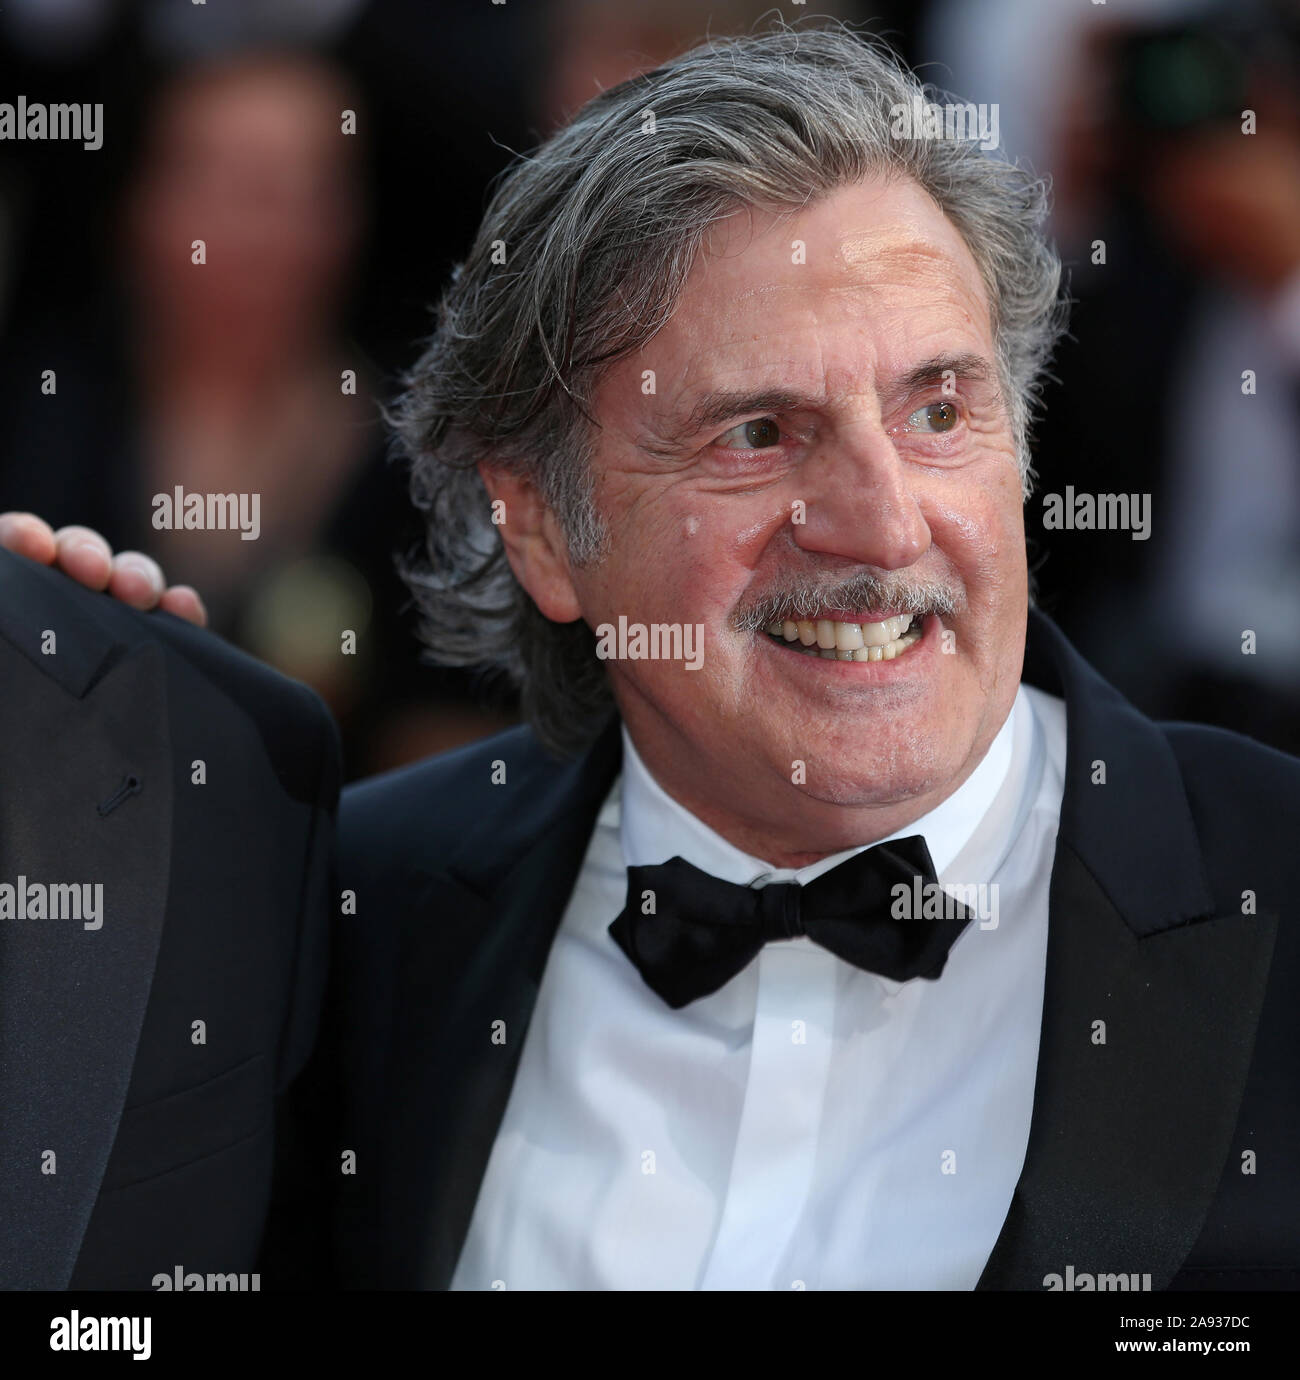 CANNES, FRANCE - MAY 20: Daniel Auteuil attends La Belle Epoque screening at the 72nd Cannes Film Festival Stock Photo